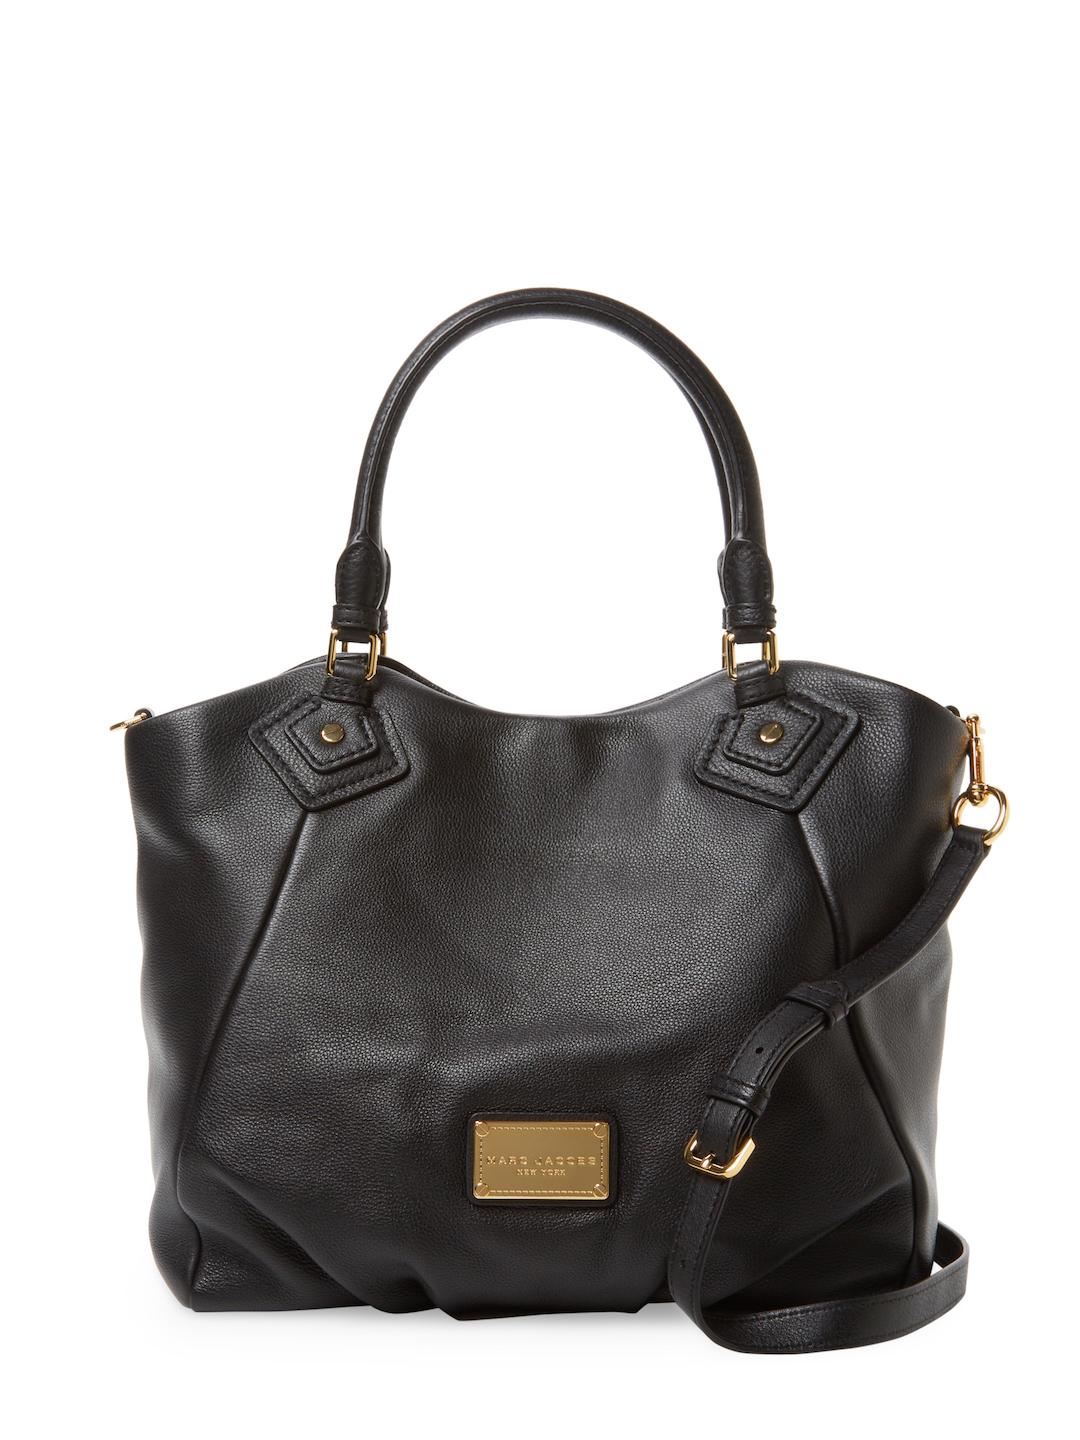 Marc Jacobs Leather Classic Tote Bag in Black - Lyst